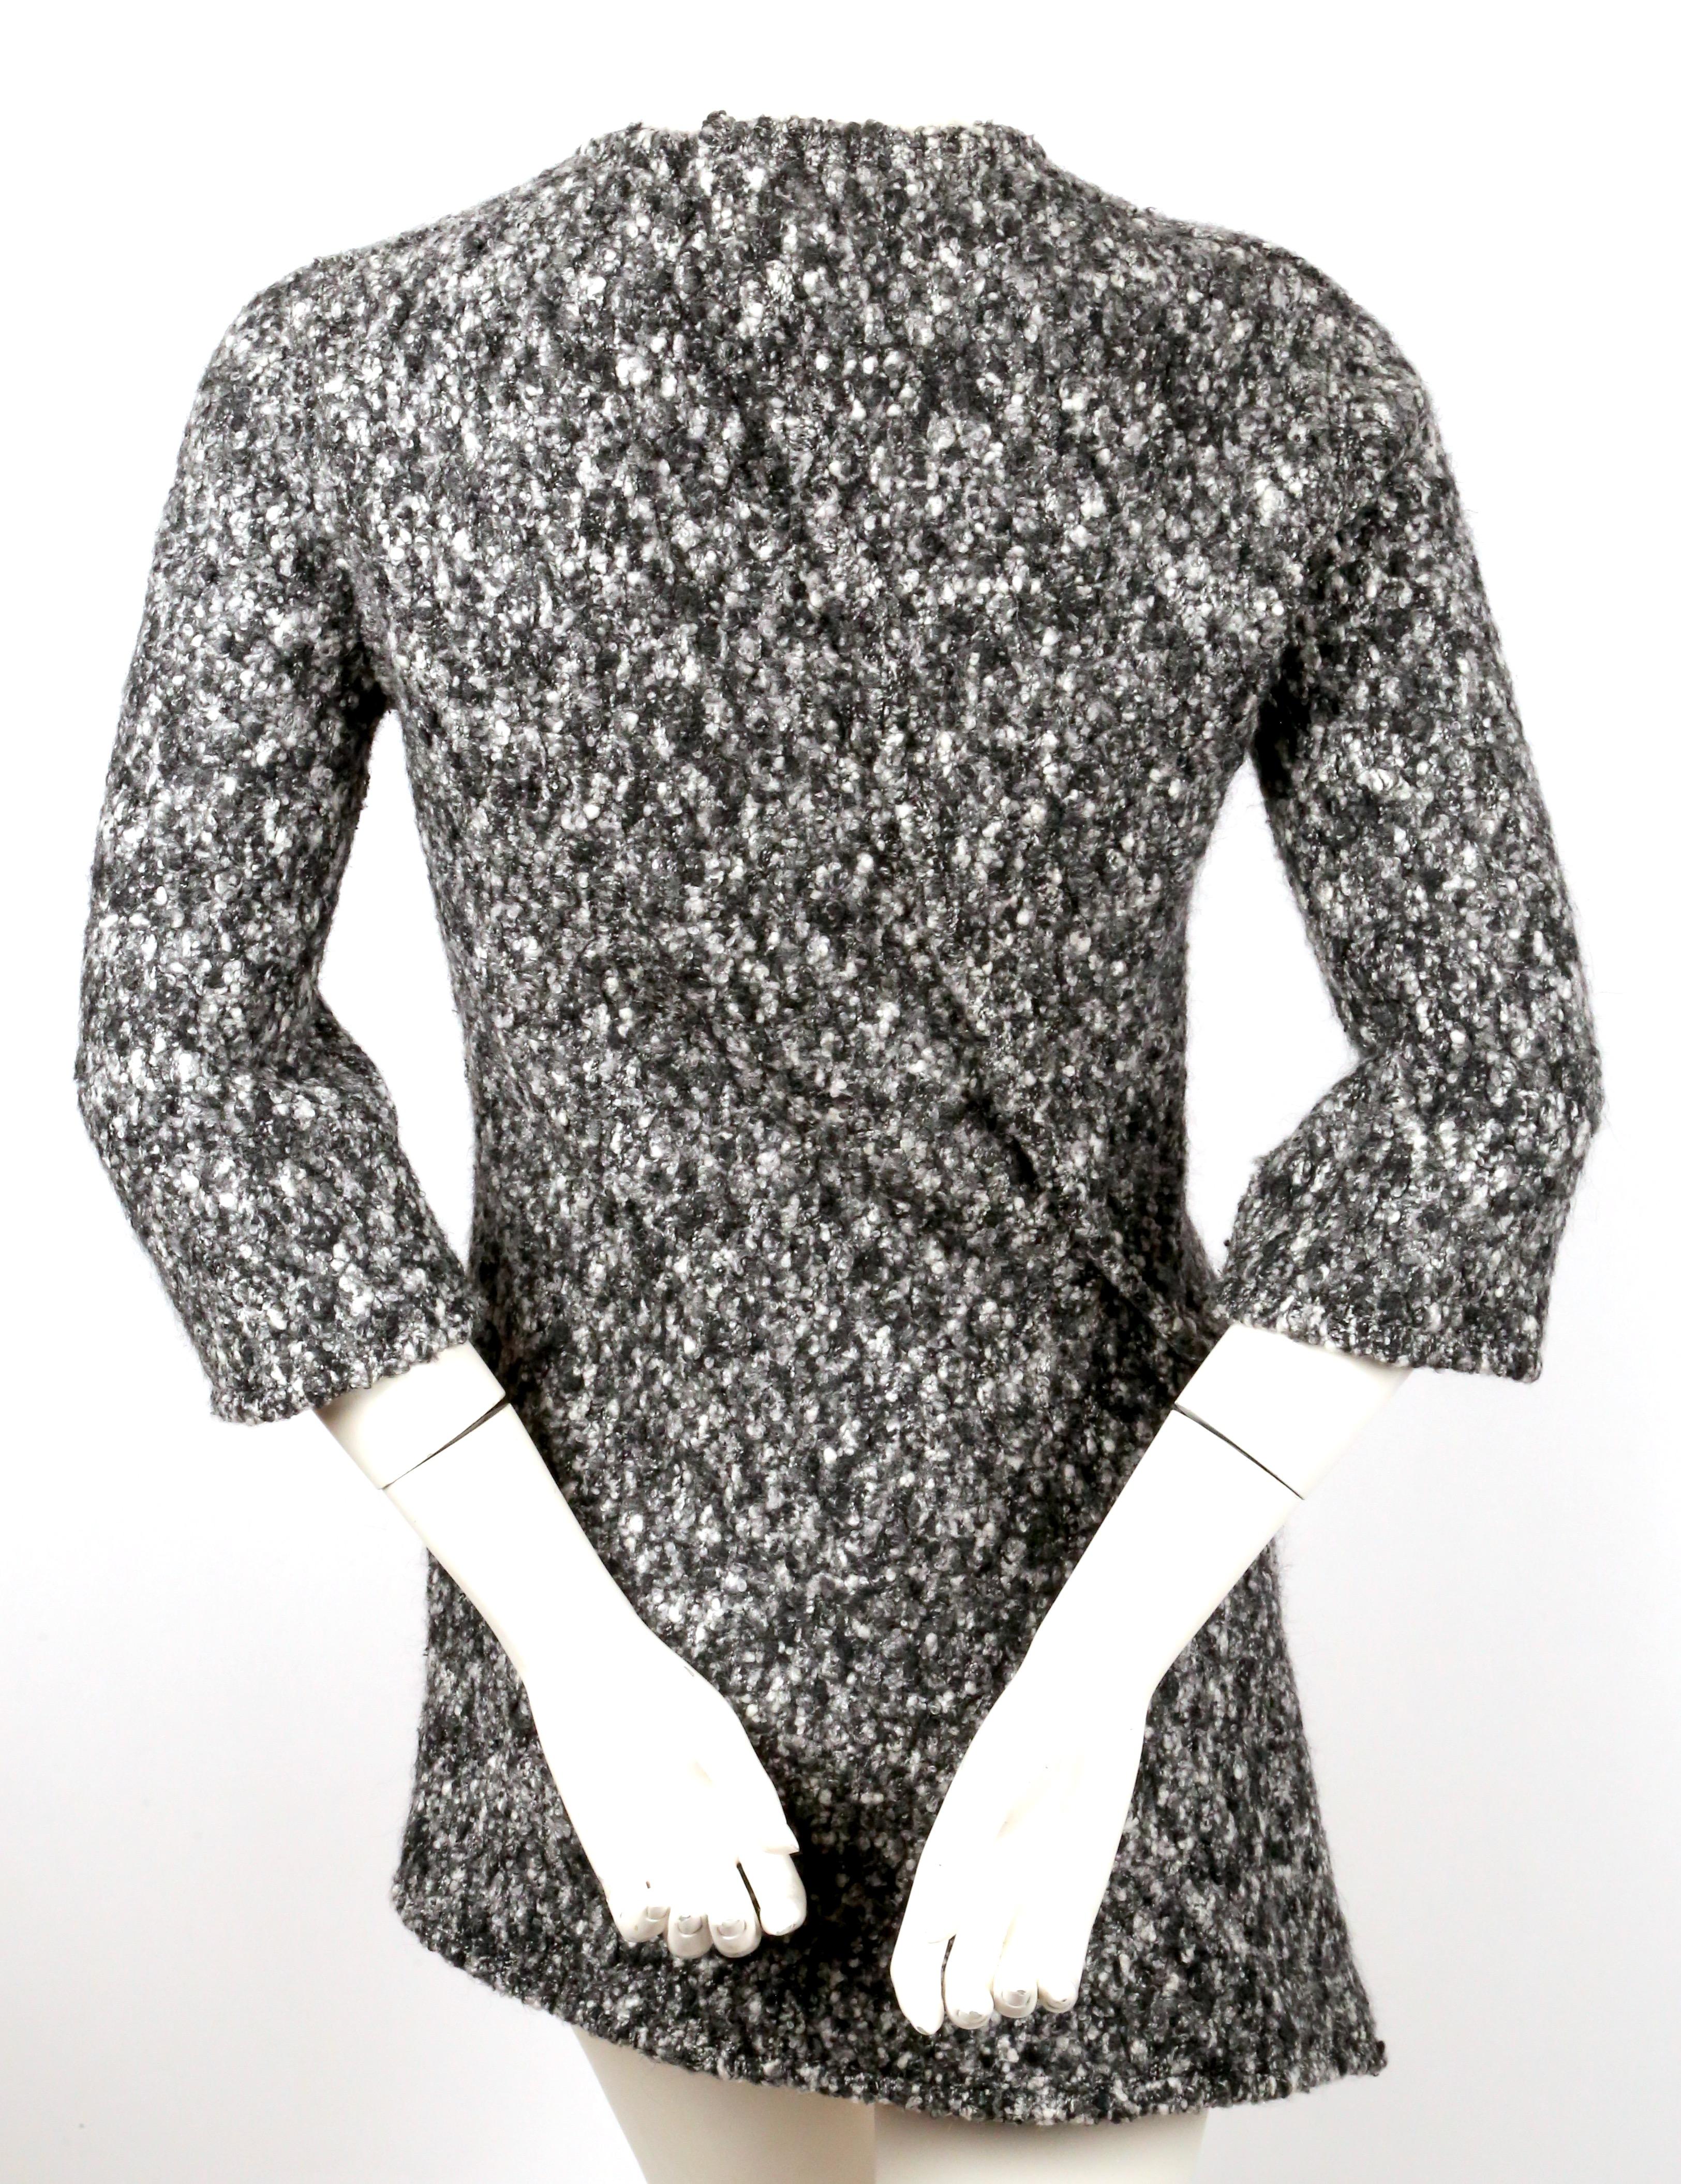 NEW 2014 CELINE by PHOEBE PHILO boucle knit runway sweater For Sale 1